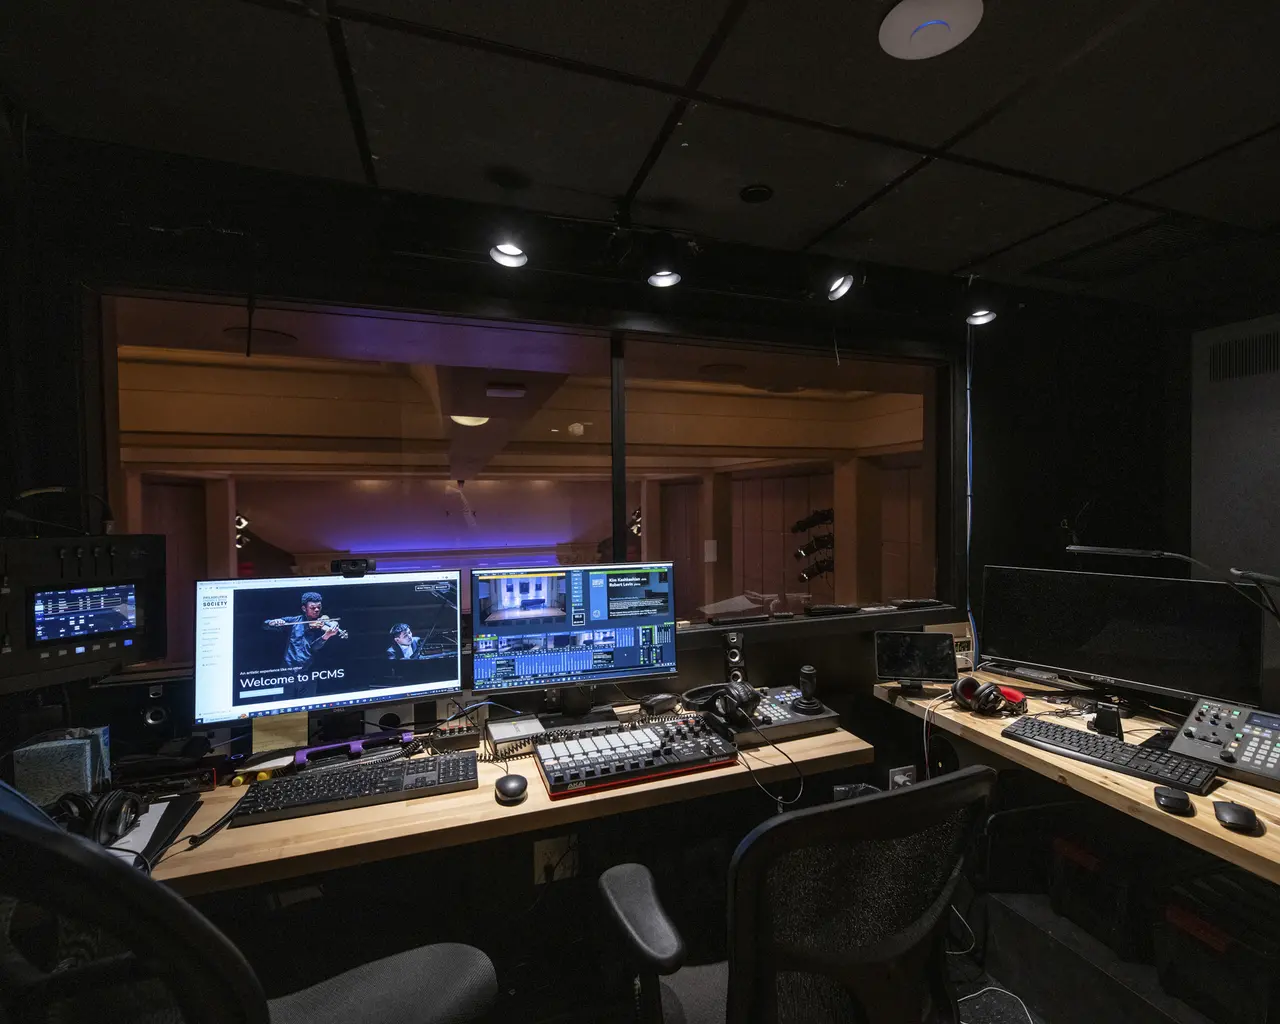 An interior view of the new AV booth at the American Philosophical Society. Multiple monitors are set up in front of a sliding window looking out over the auditorium.